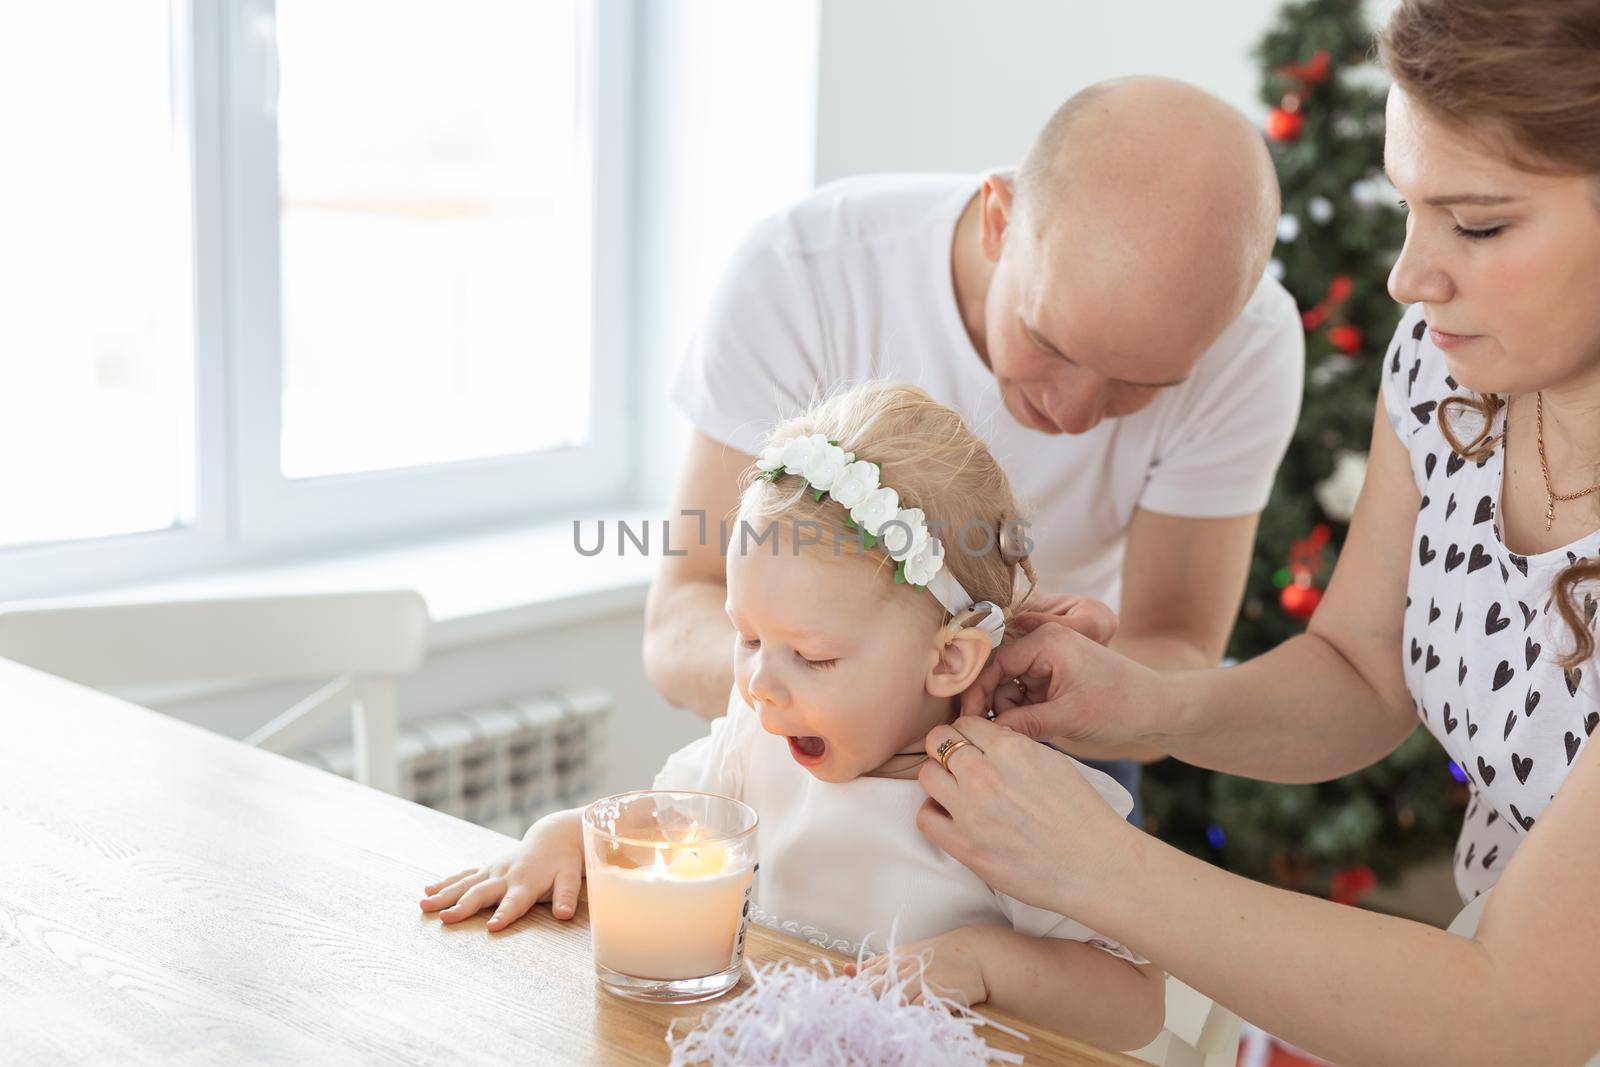 Mother and father helps to put on cochlear implant for their deaf baby daughter in christmas living room. Hearing aid and innovating medical technologies treatment deafness